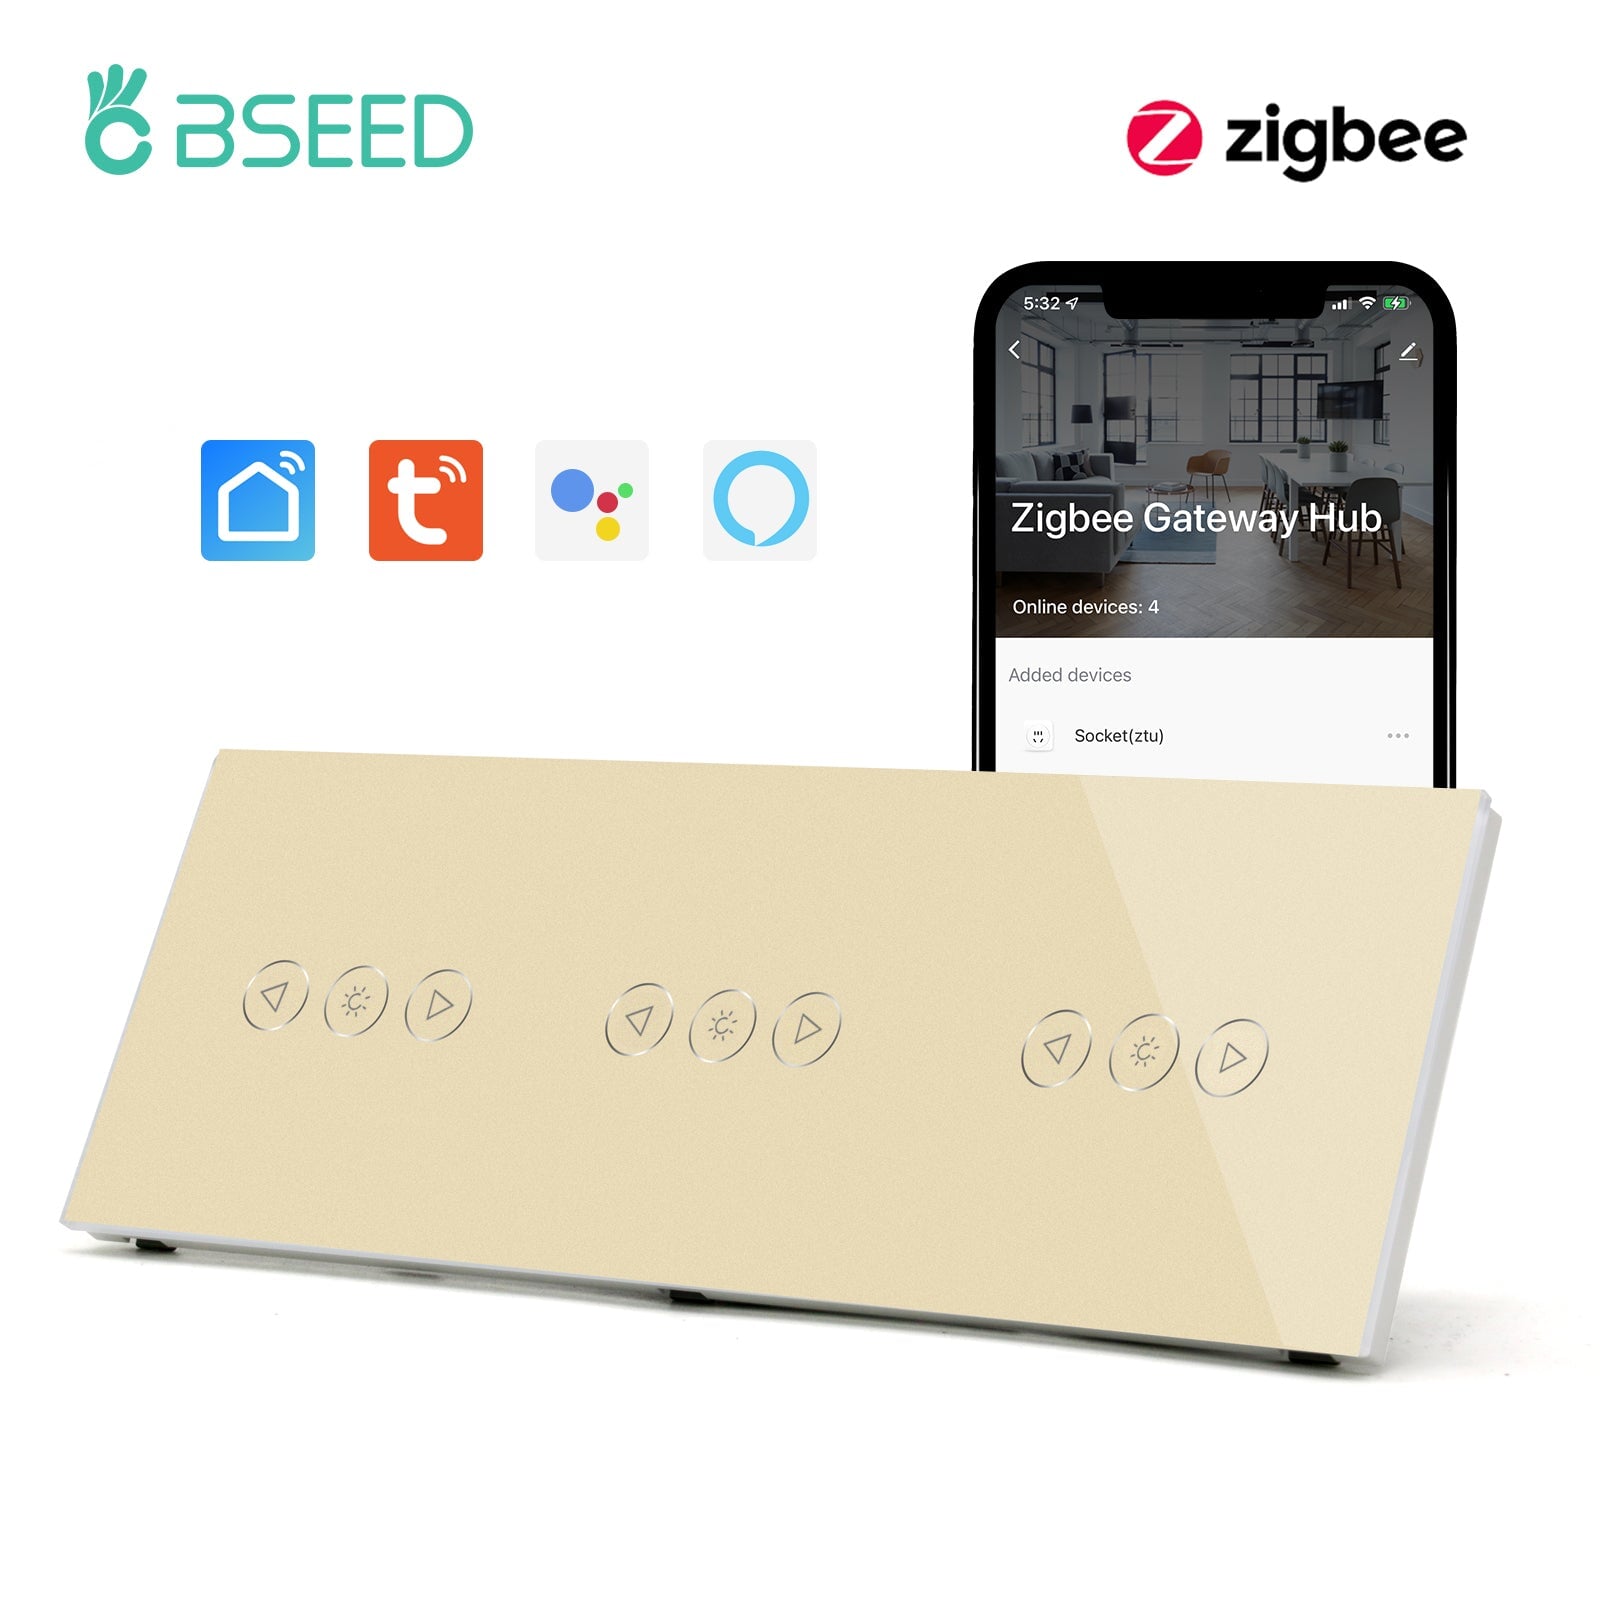 Bseed triple New Zigbee Touch Light Dimmer Smart Switch Light Switches Bseedswitch Golden 